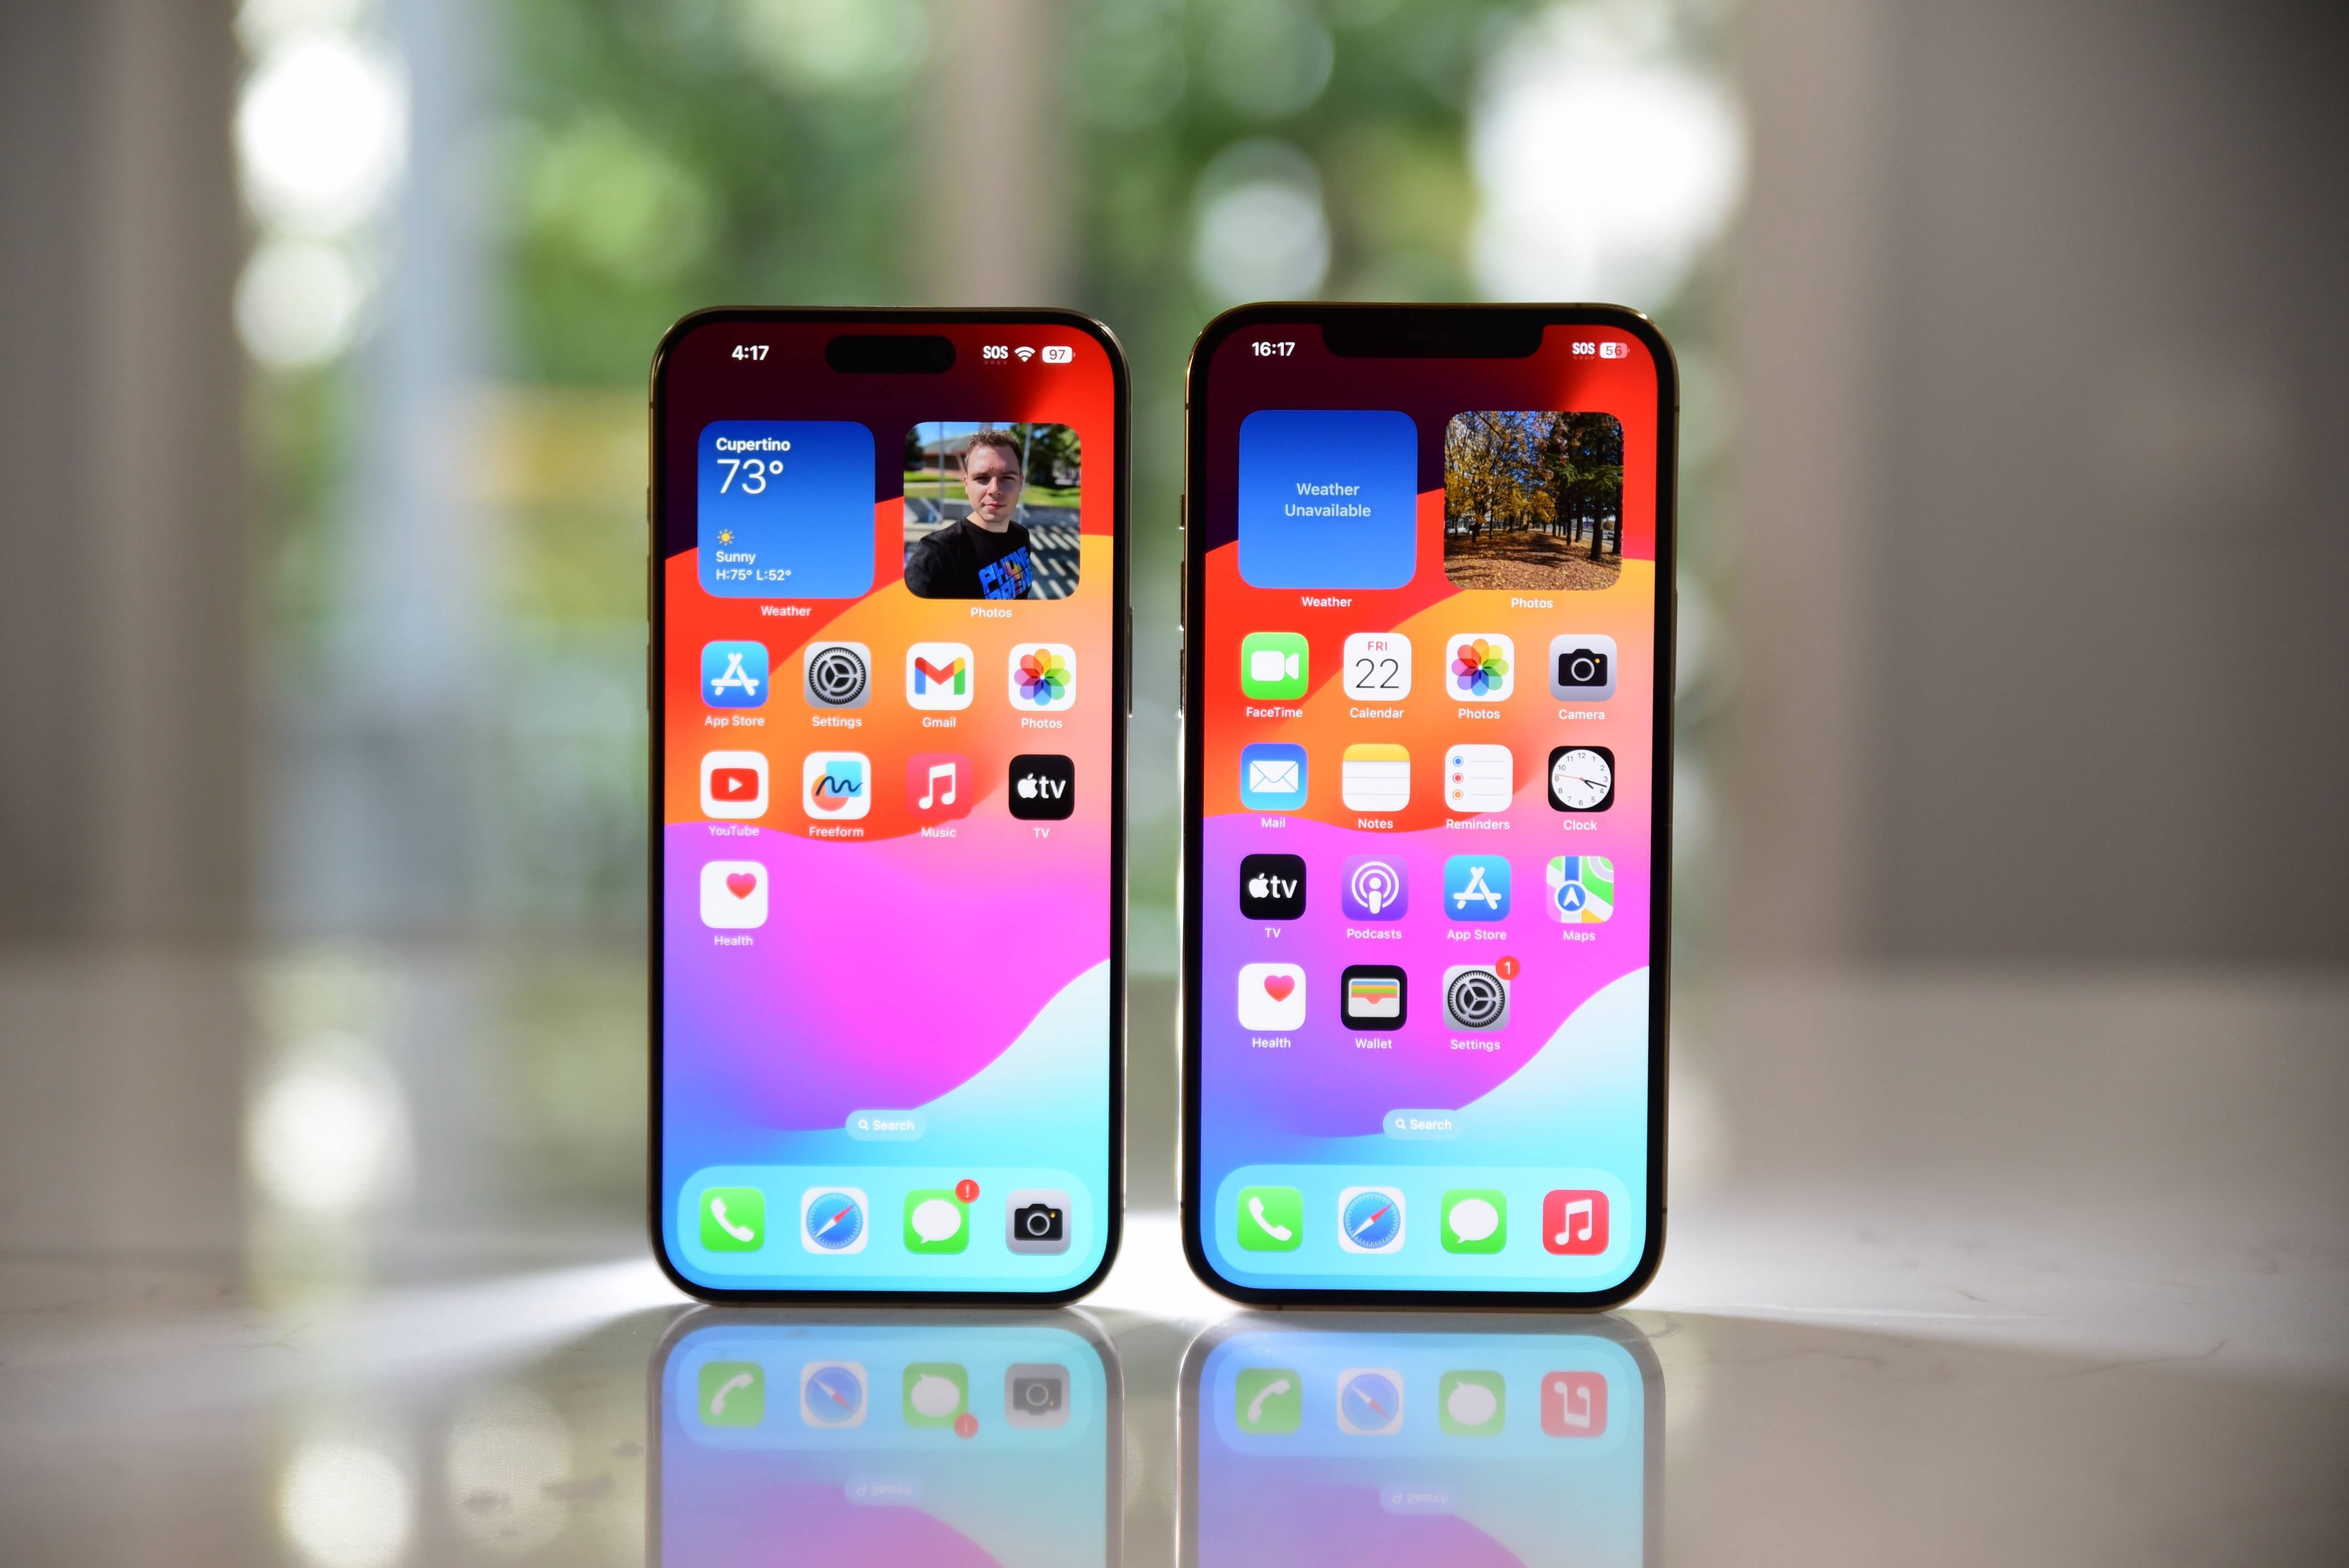 Apple iPhone 12 Pro Max review: Shootout with iPhone 12 Pro